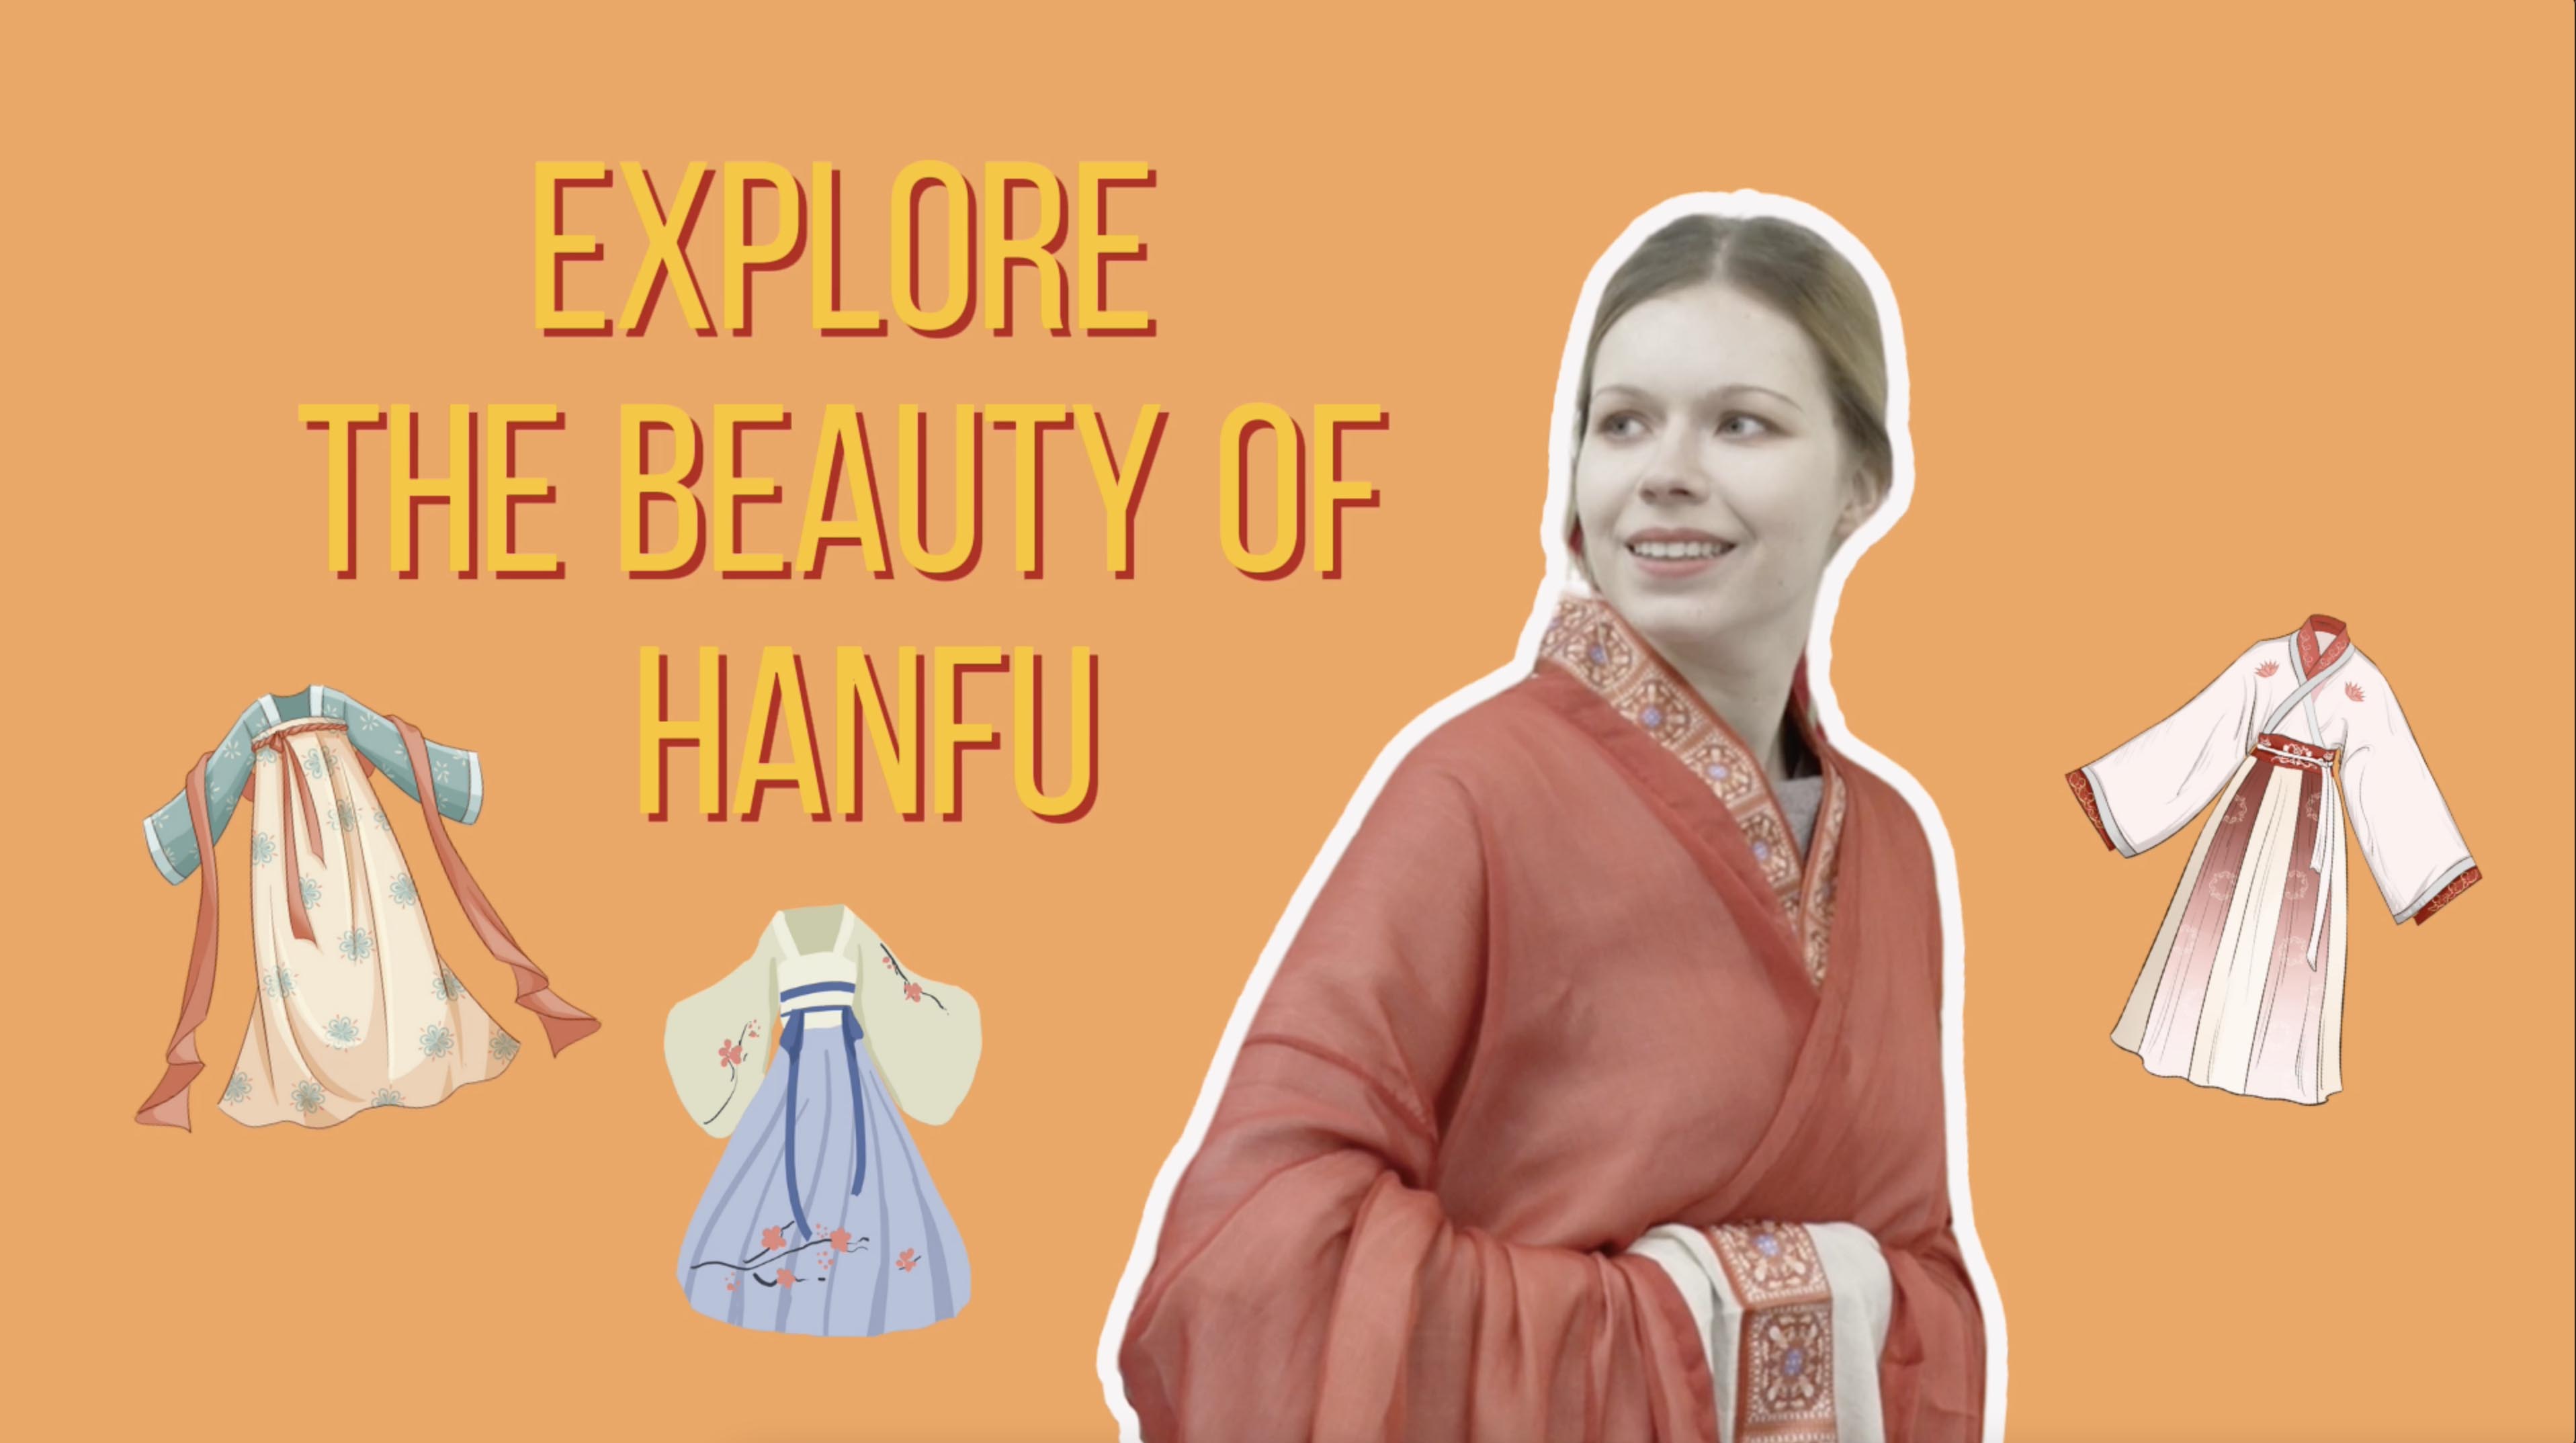 Travel back in time and explore the beauty of Hanfu